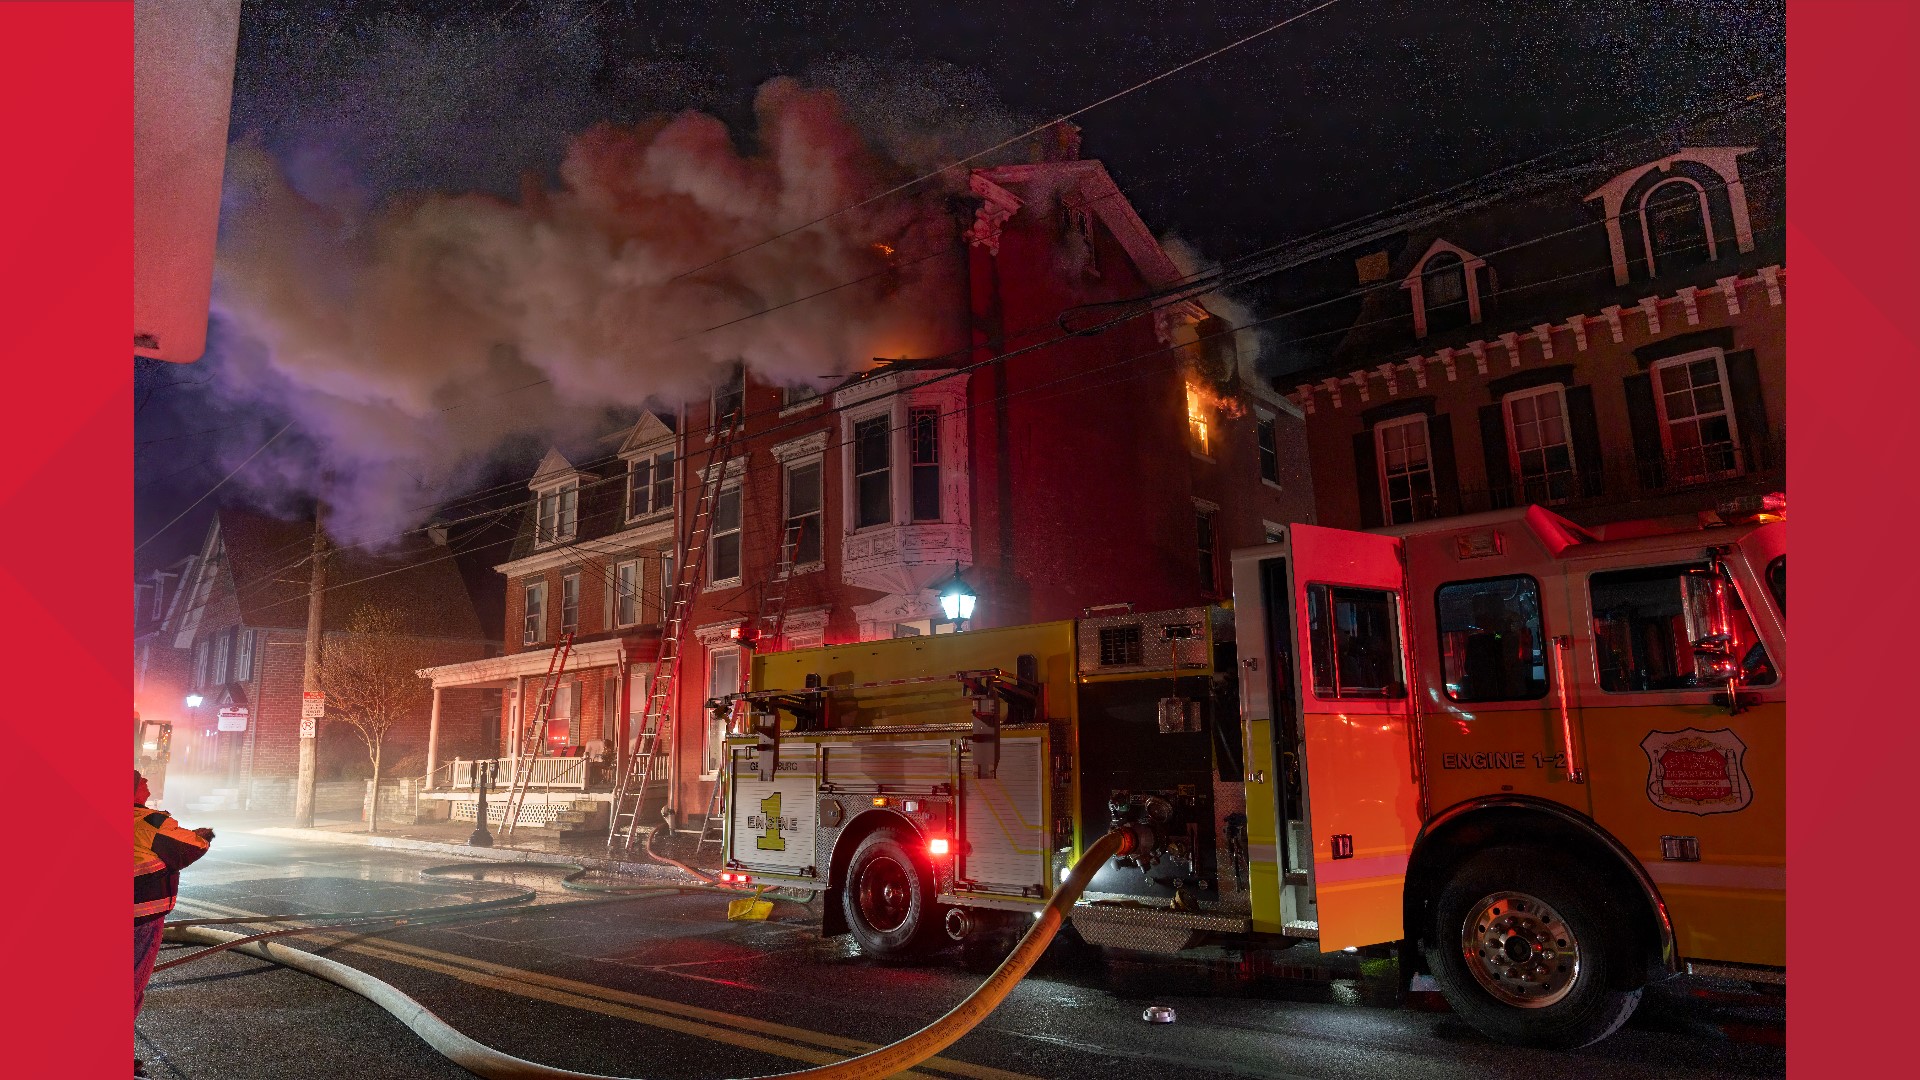 One person was killed in the fire on West Middle Street and nine were displaced, according to the Gettysburg Police Department.